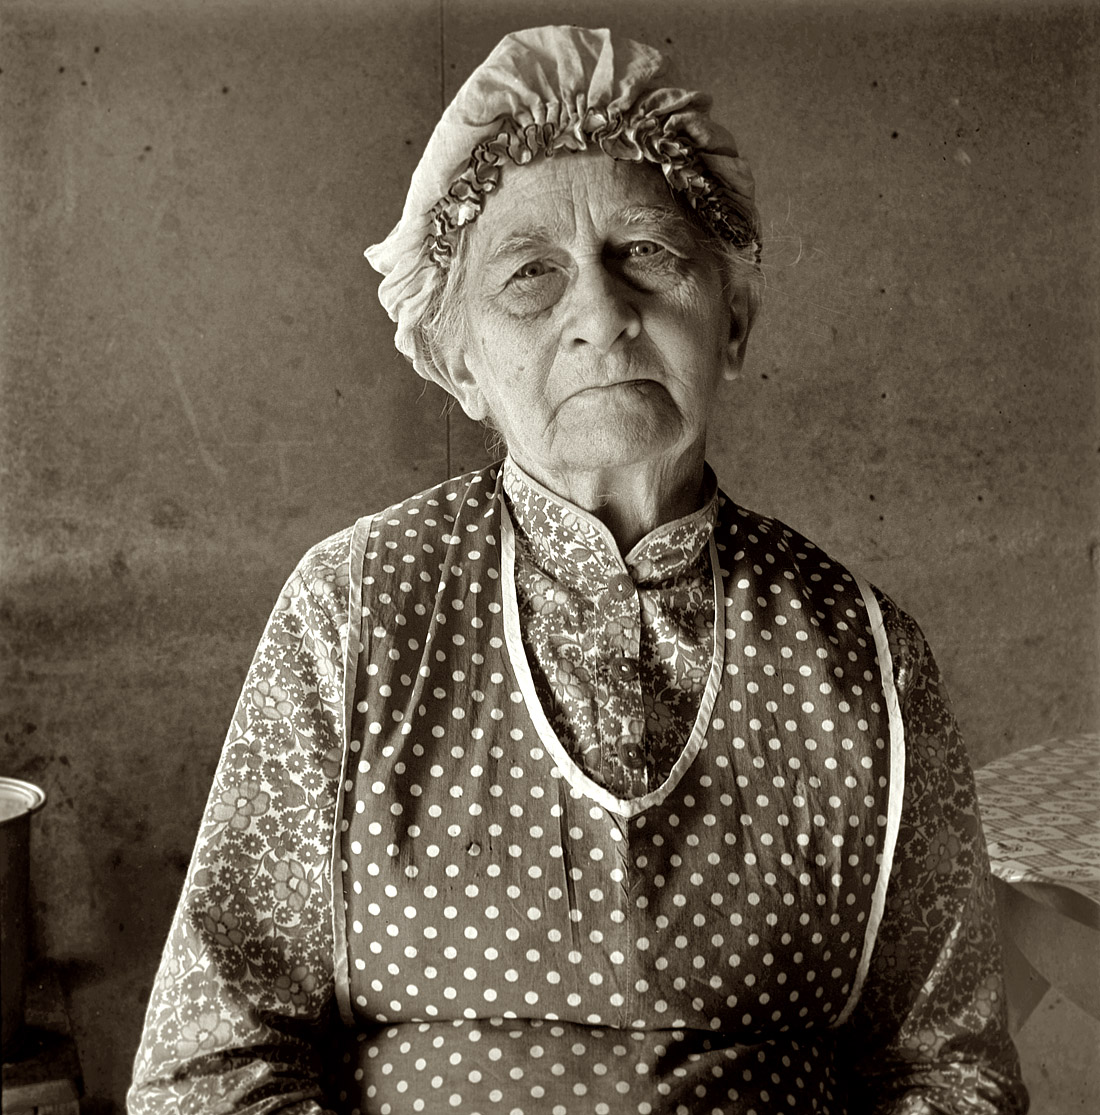 October 1939. "Soper grandmother, who lives with family. Farm Security Administration borrower. Willow Creek area. Malheur County, Oregon." Medium-format nitrate negative by Dorothea Lange for the FSA. View full size.